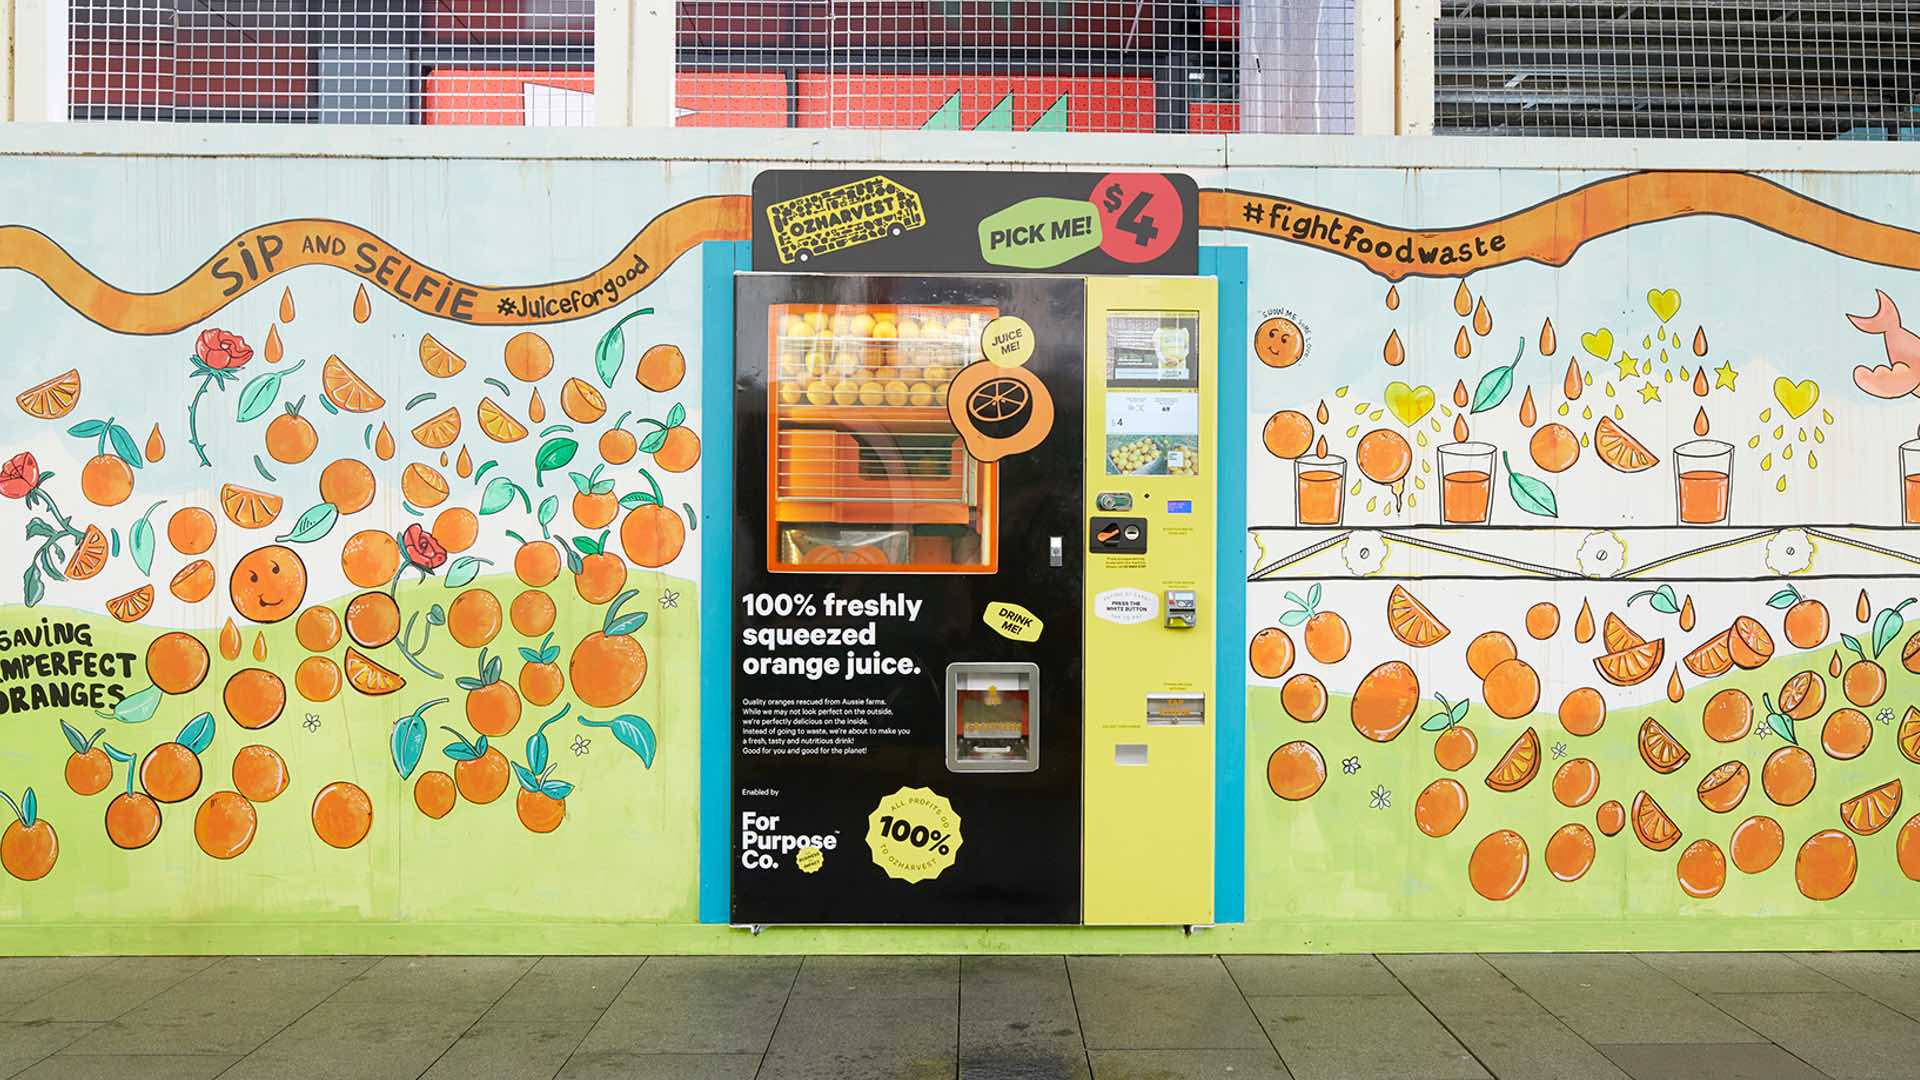 These New Sydney Vending Machines Are Dispensing Freshly Squeezed OJ for a Good Cause